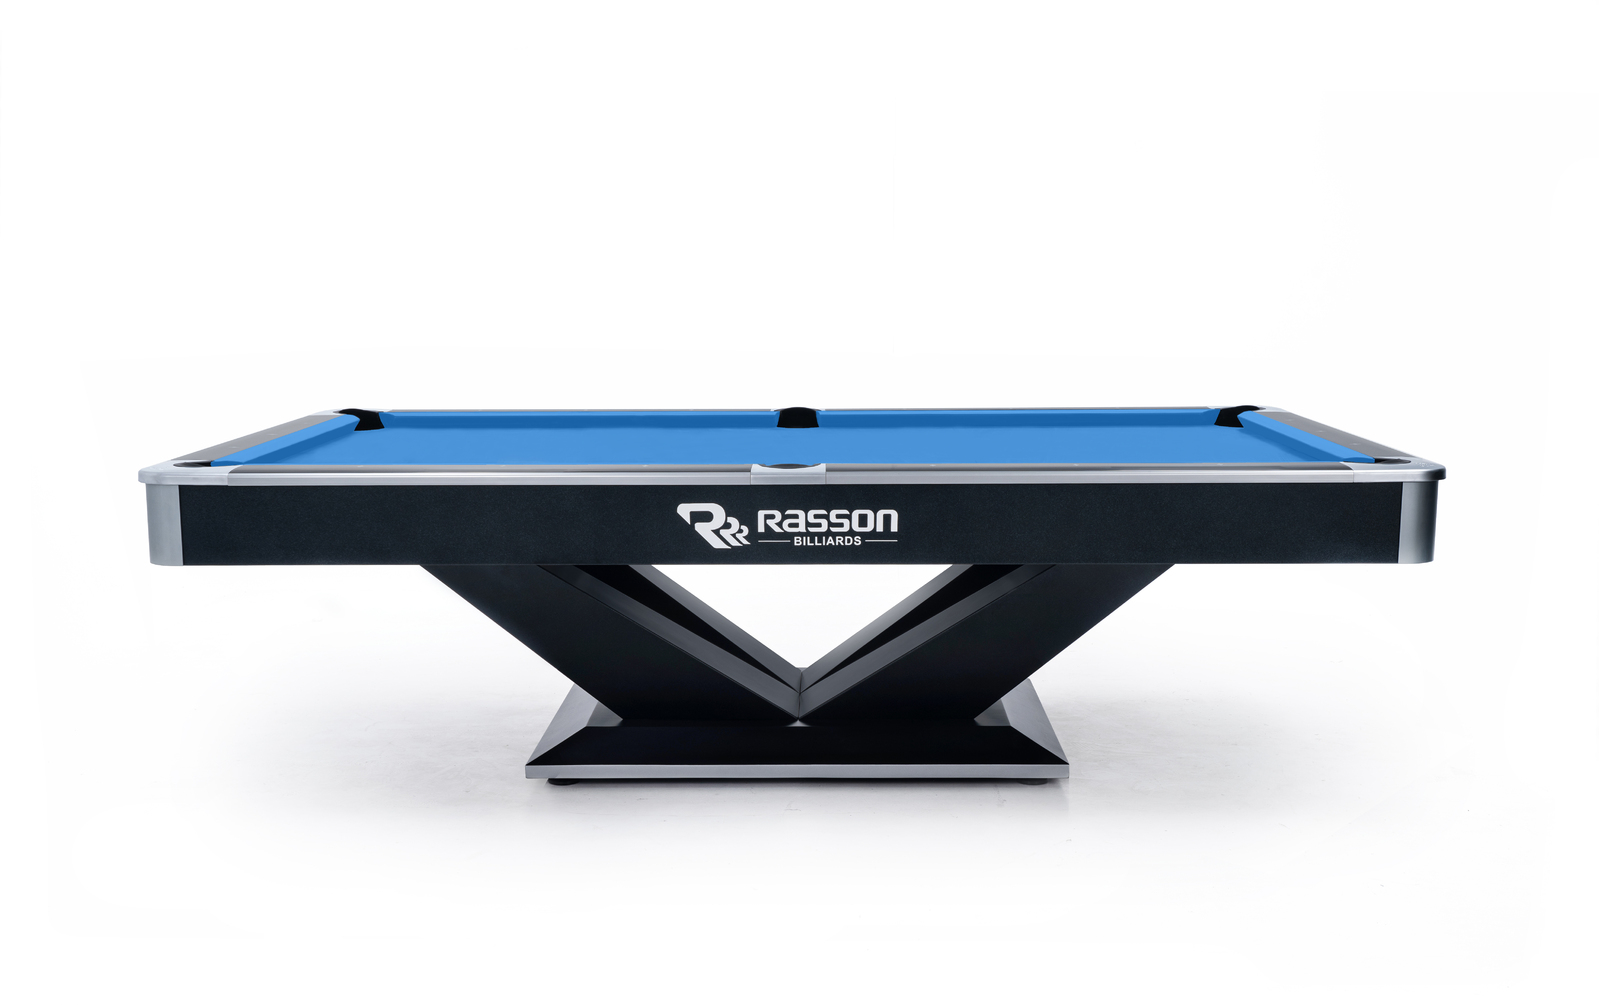 Rogers Slate Pool Table by Billiards Select